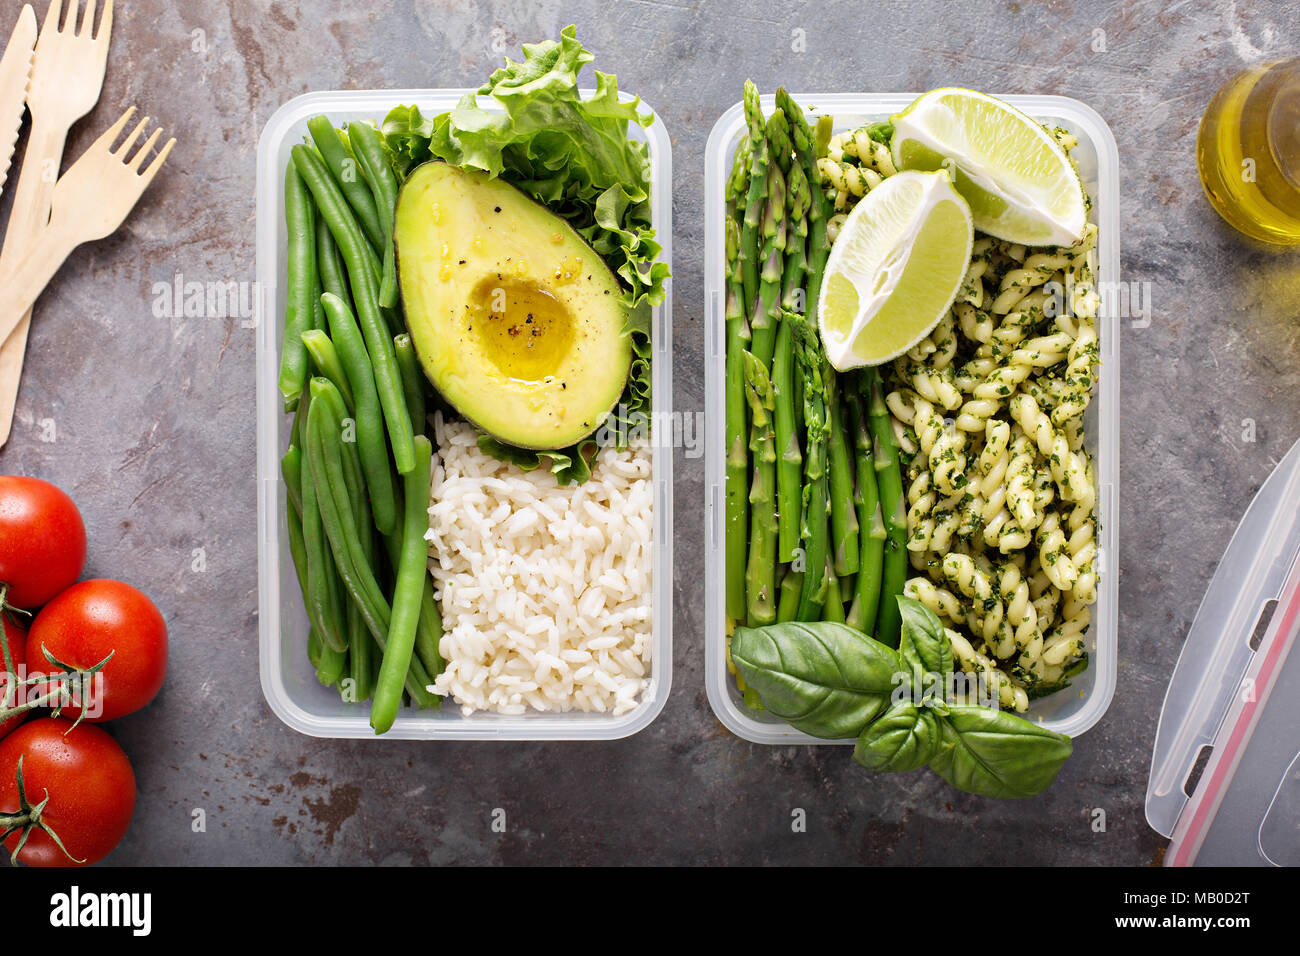 Vegan meal prep containers with rice and pasta with green pesto sauce and vegetables Stock Photo